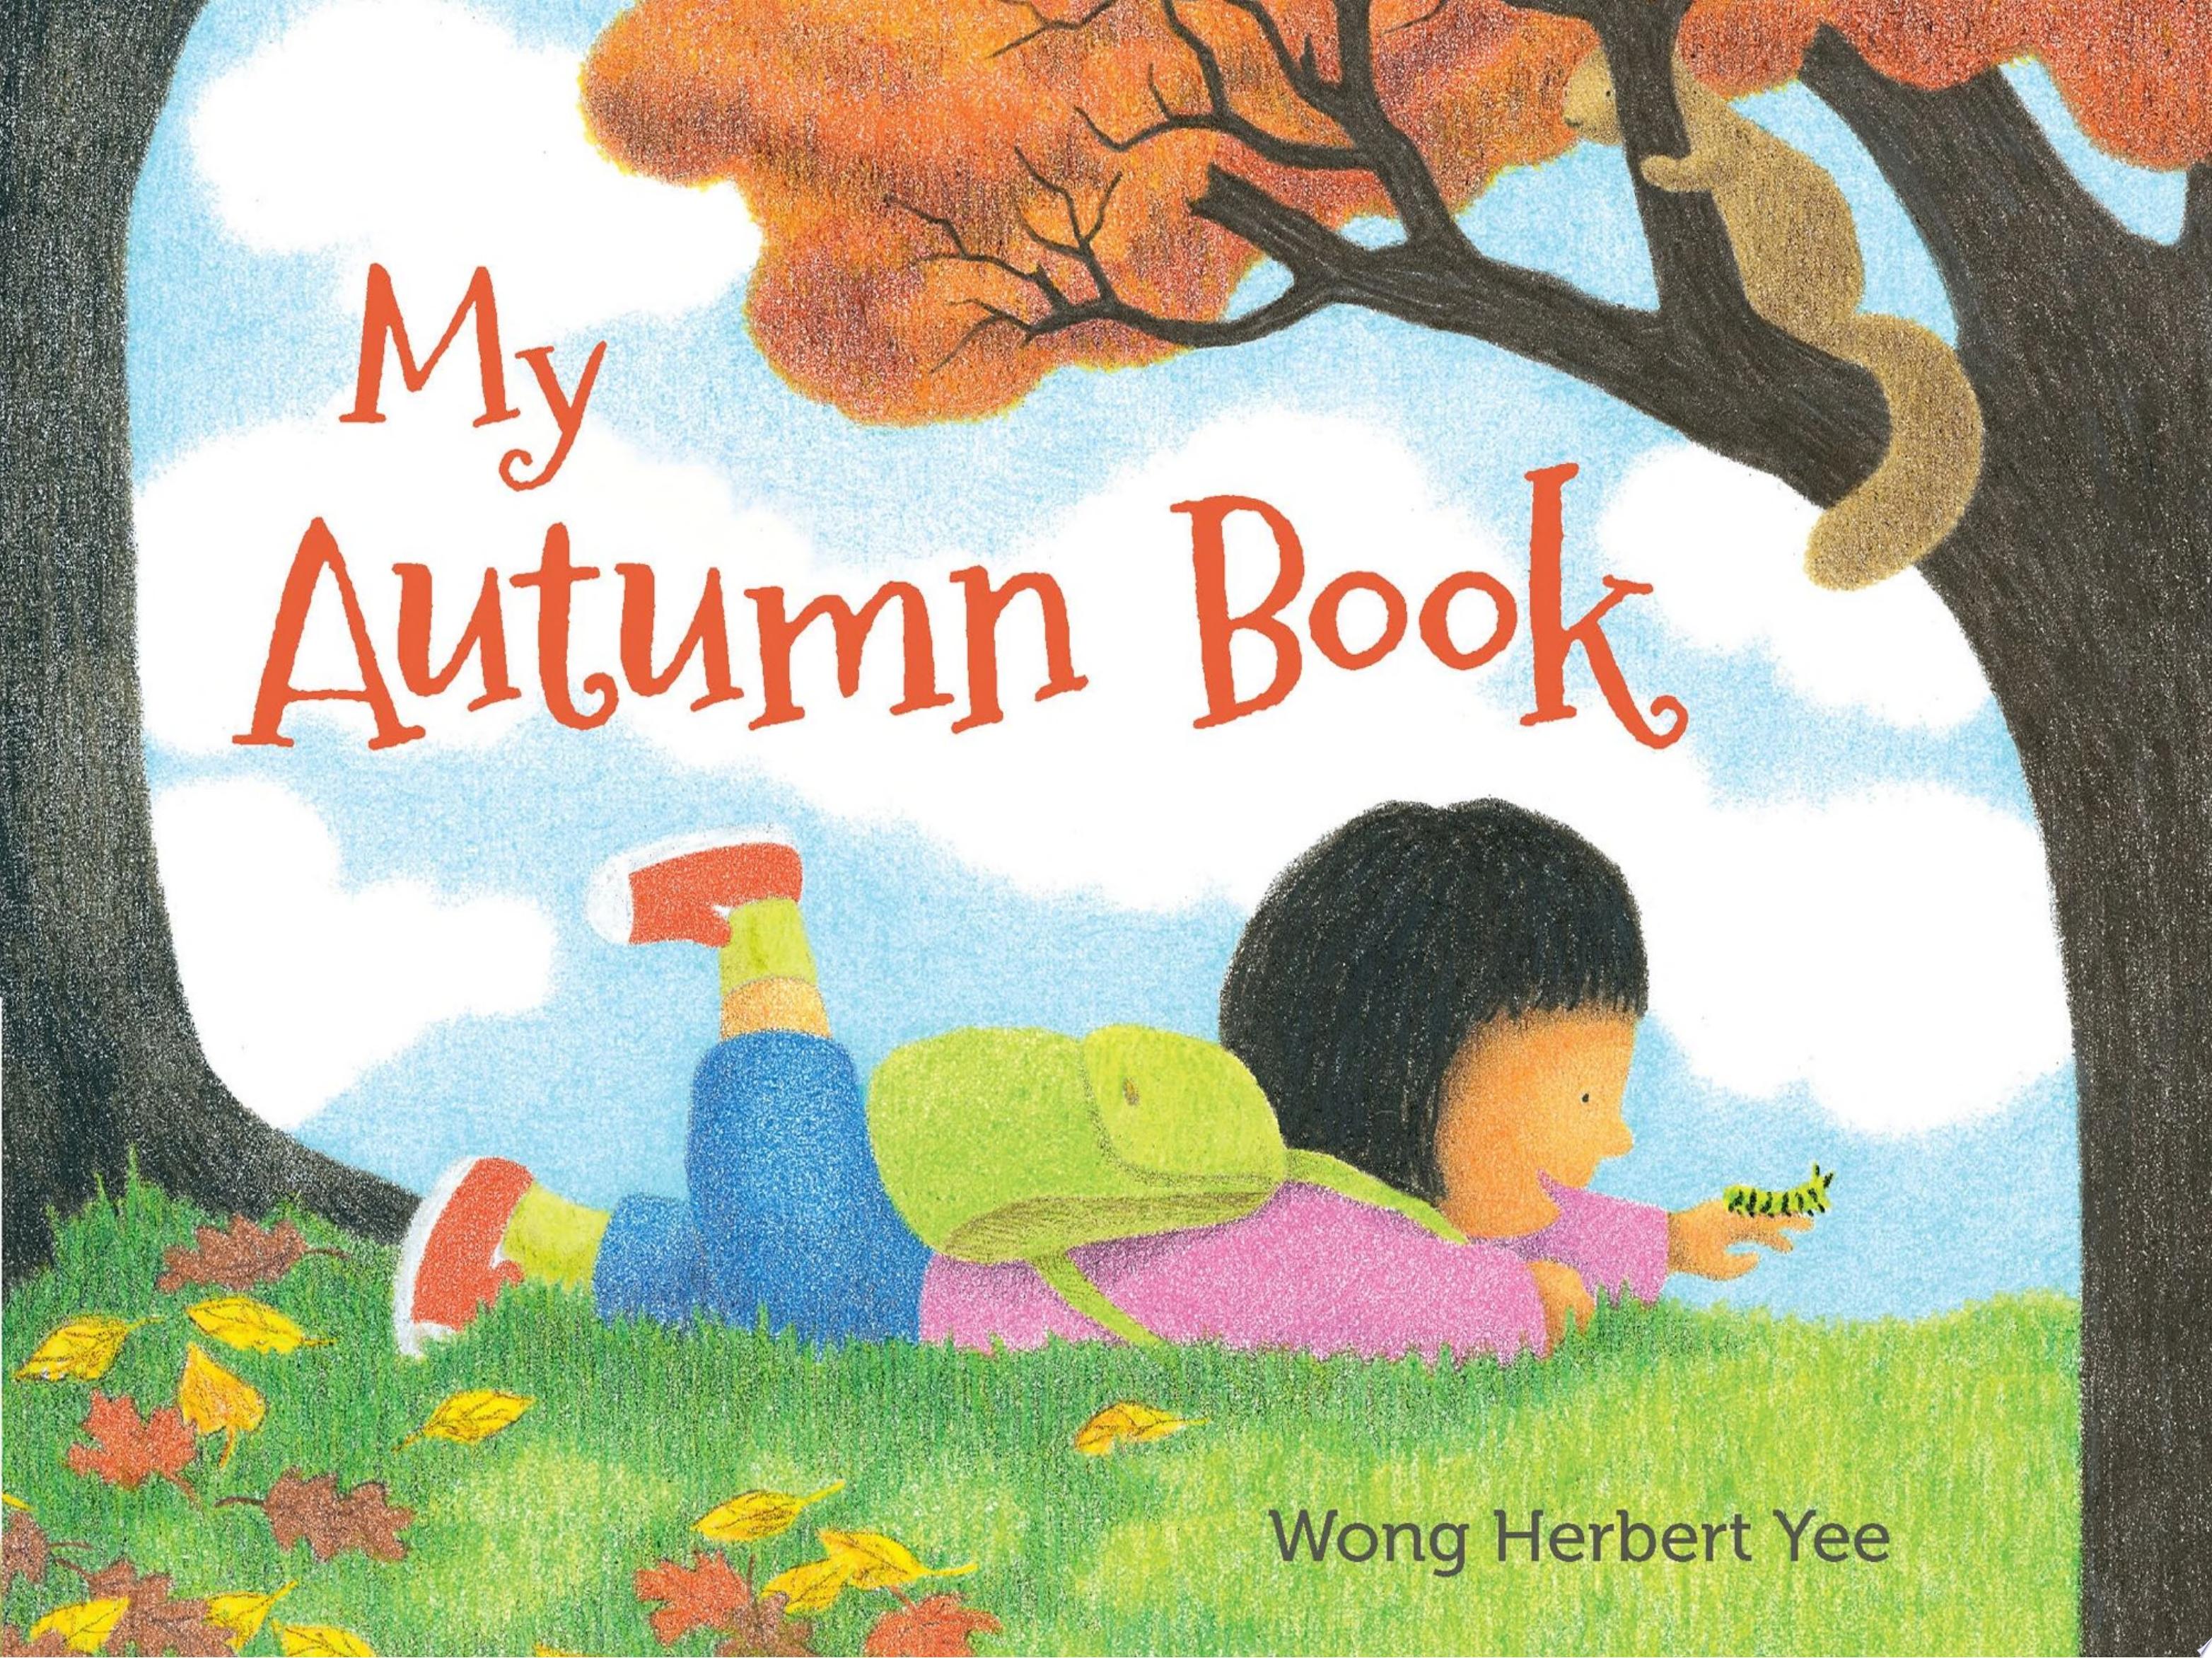 Image for "My Autumn Book"